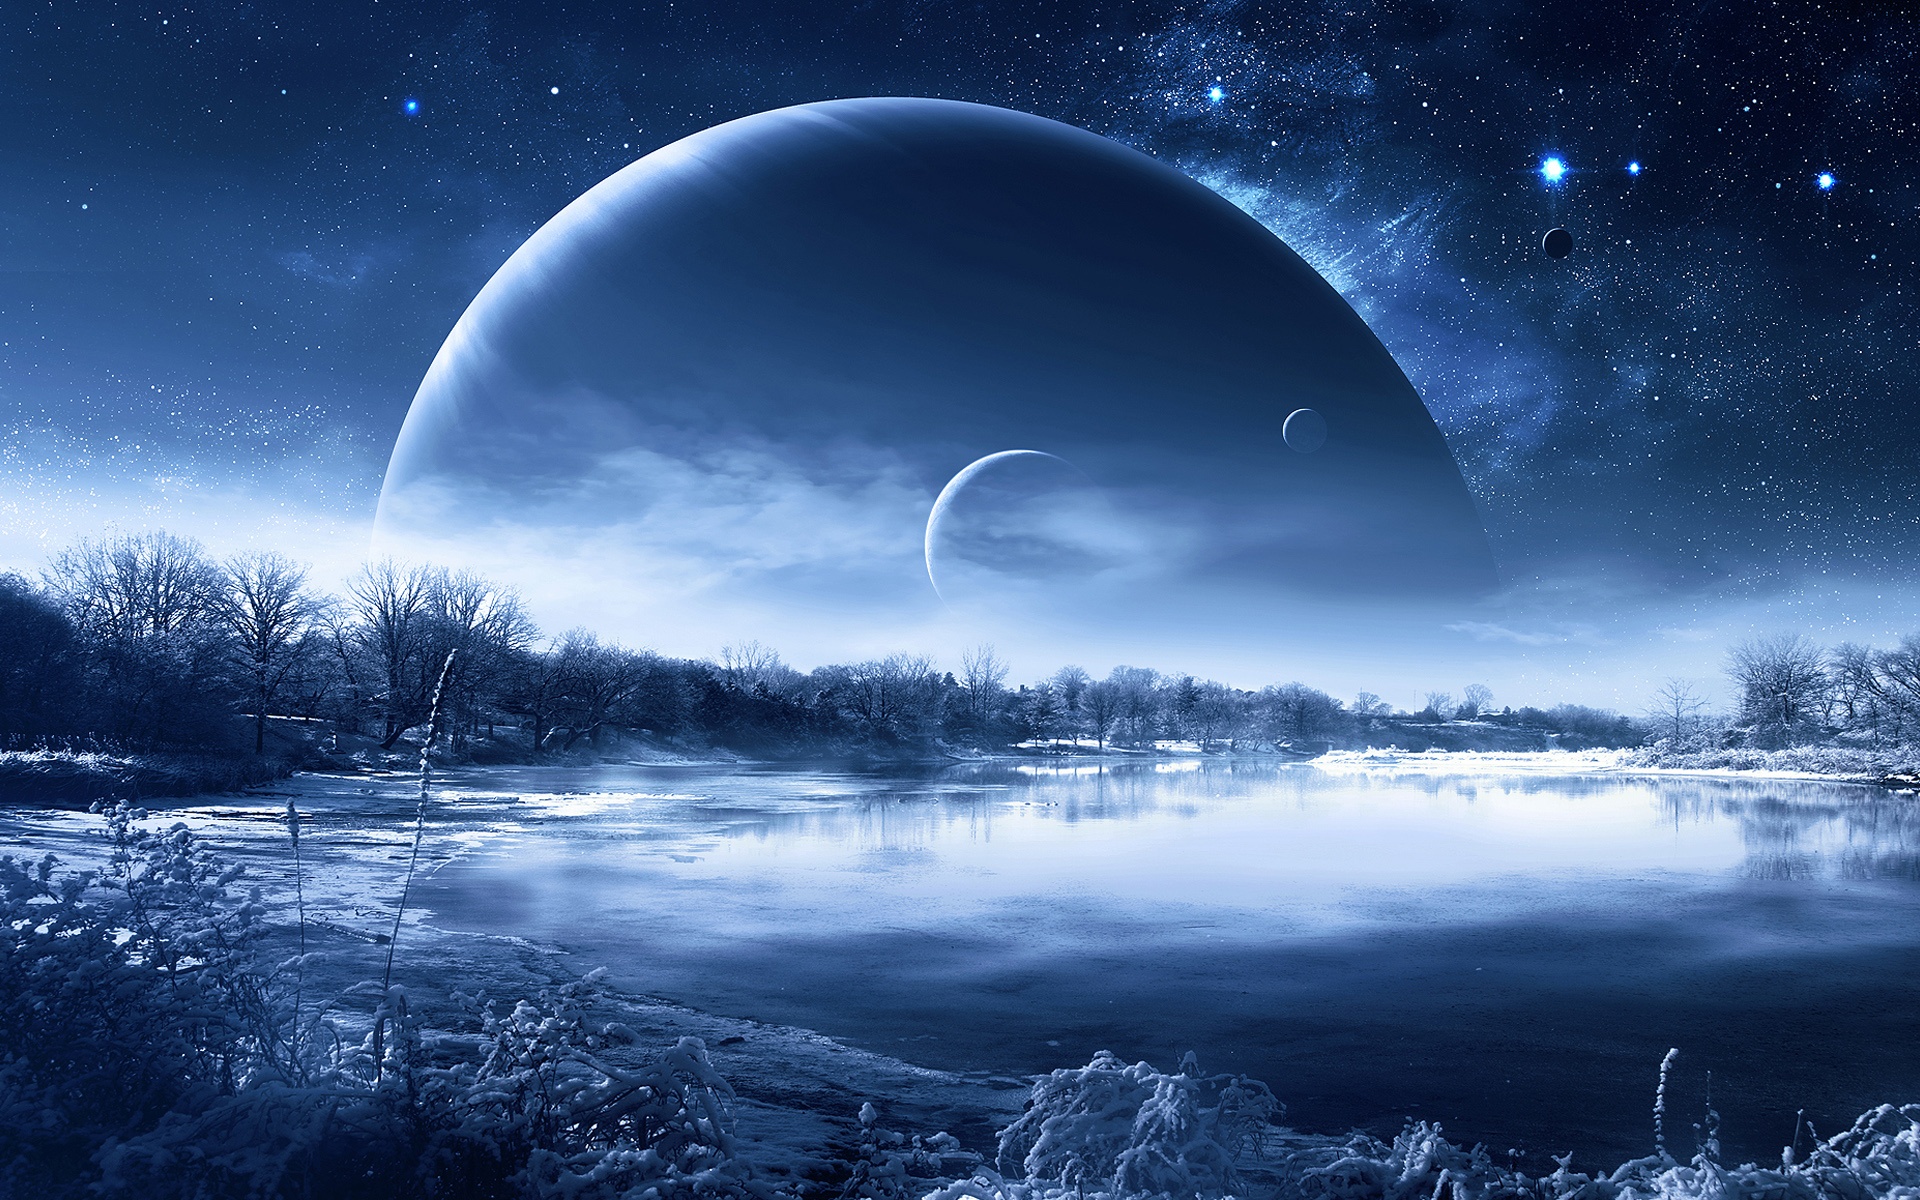 Winter-snow-lake-trees-planets-in-the-sky-creative-design_1920x1200.jpg